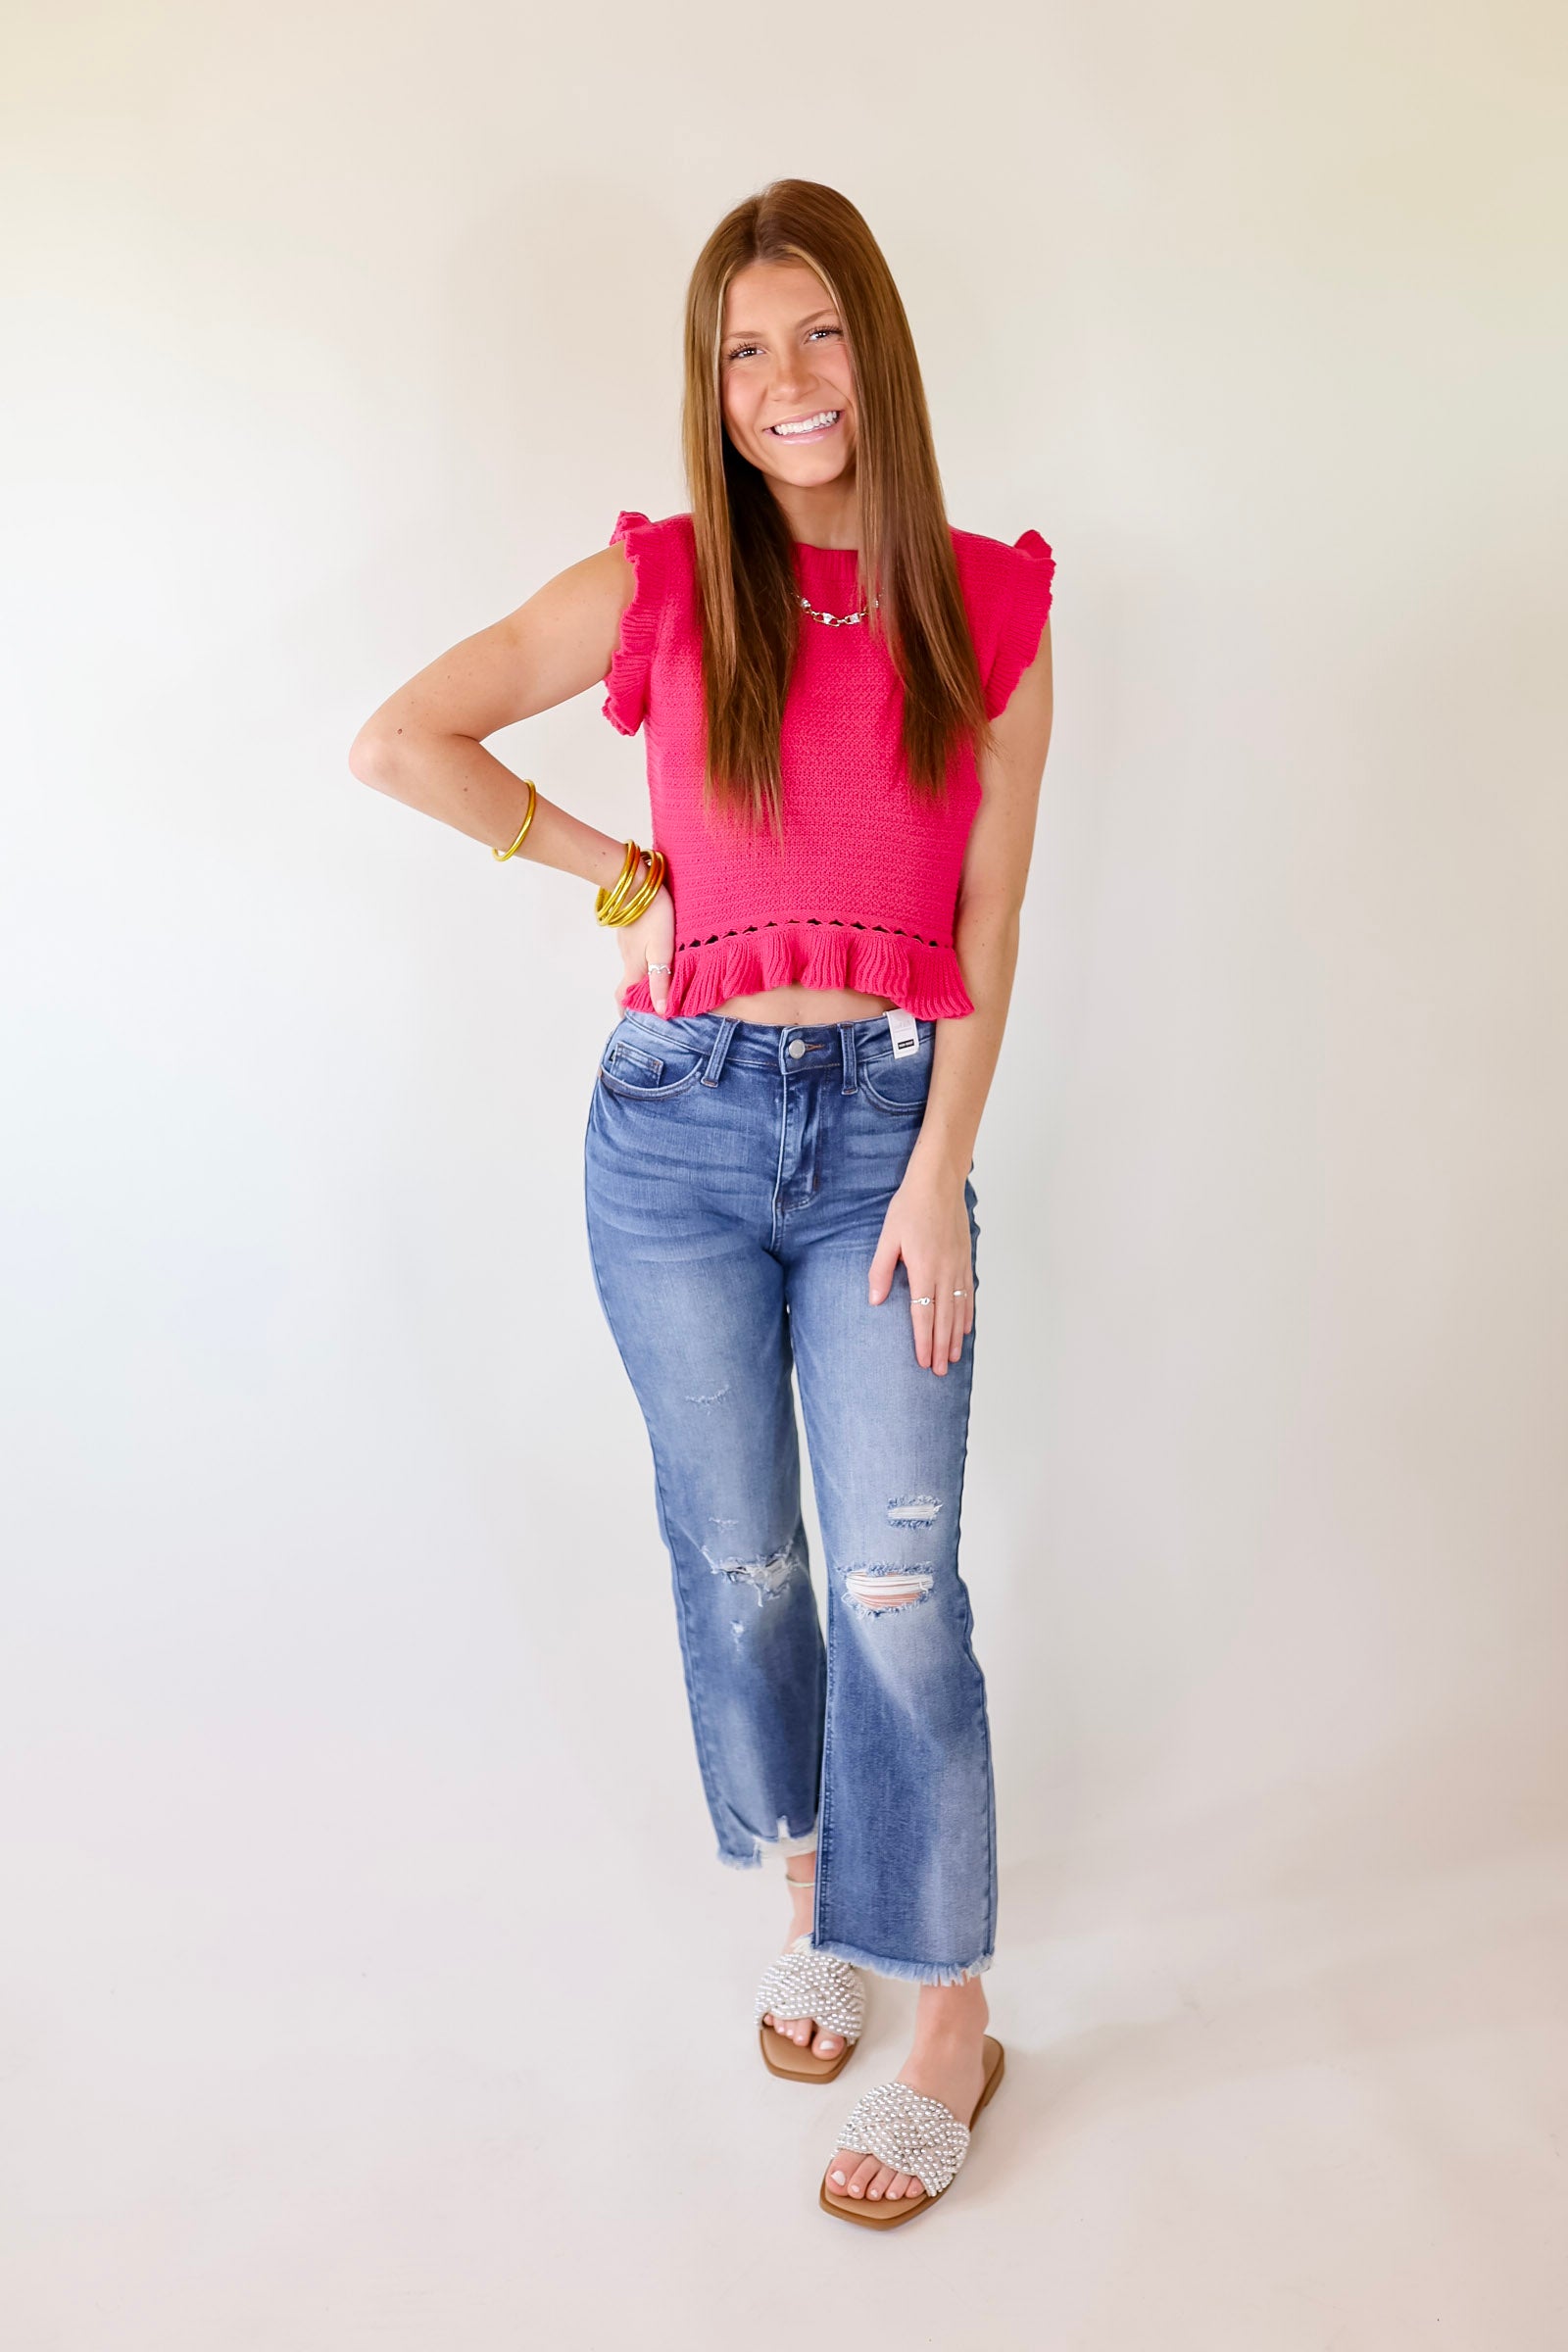 Breezy Baby Cropped Sweater with Ruffle Cap Sleeves in Hot Pink - Giddy Up Glamour Boutique